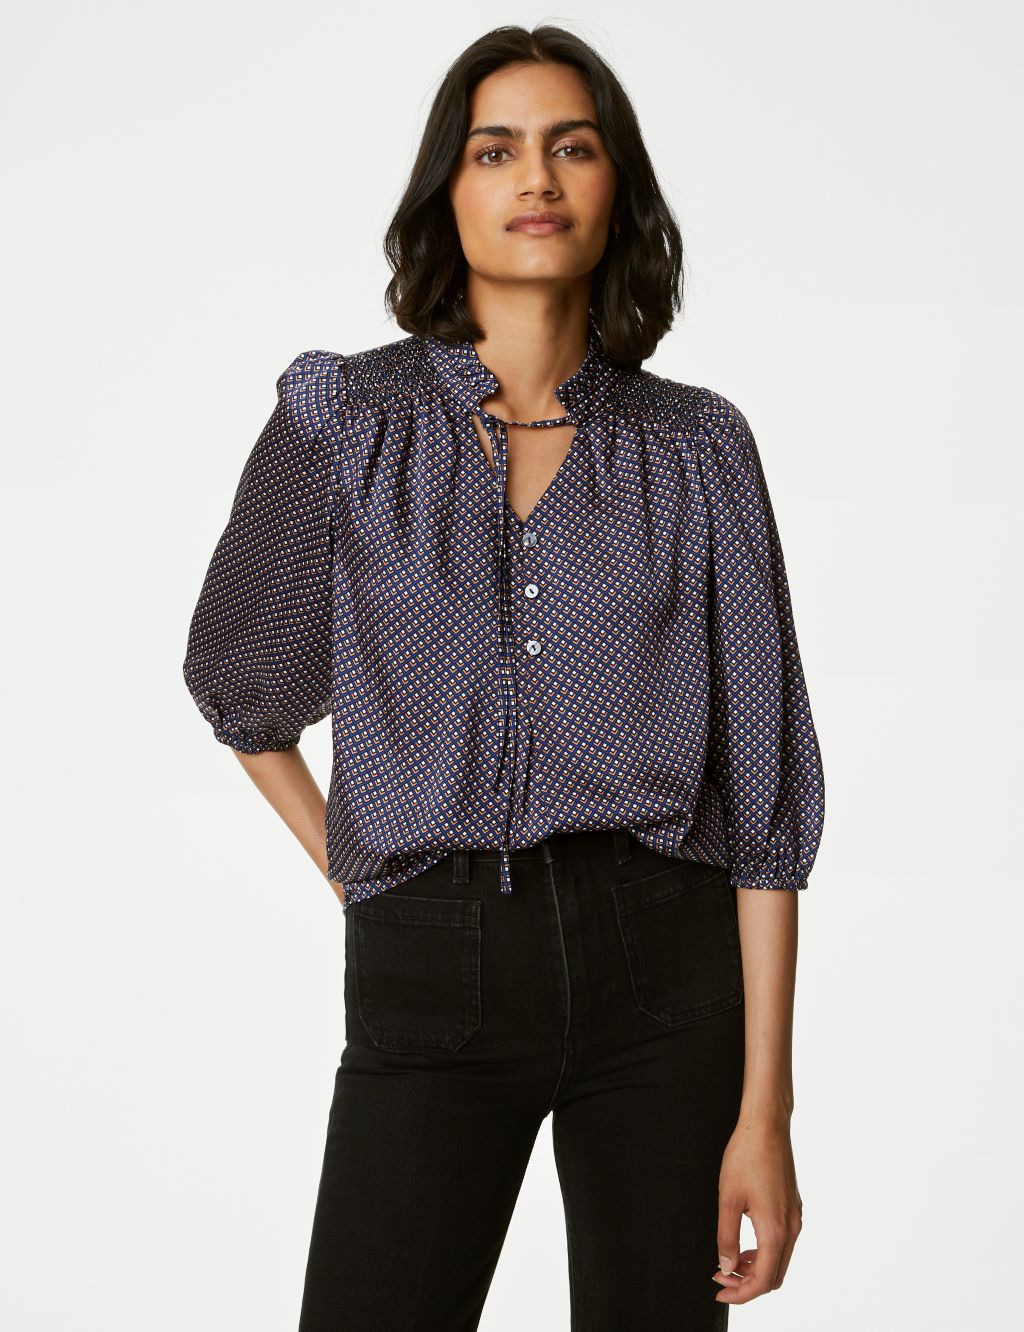 Printed Frill Neck Tie Front Popover Blouse image 1